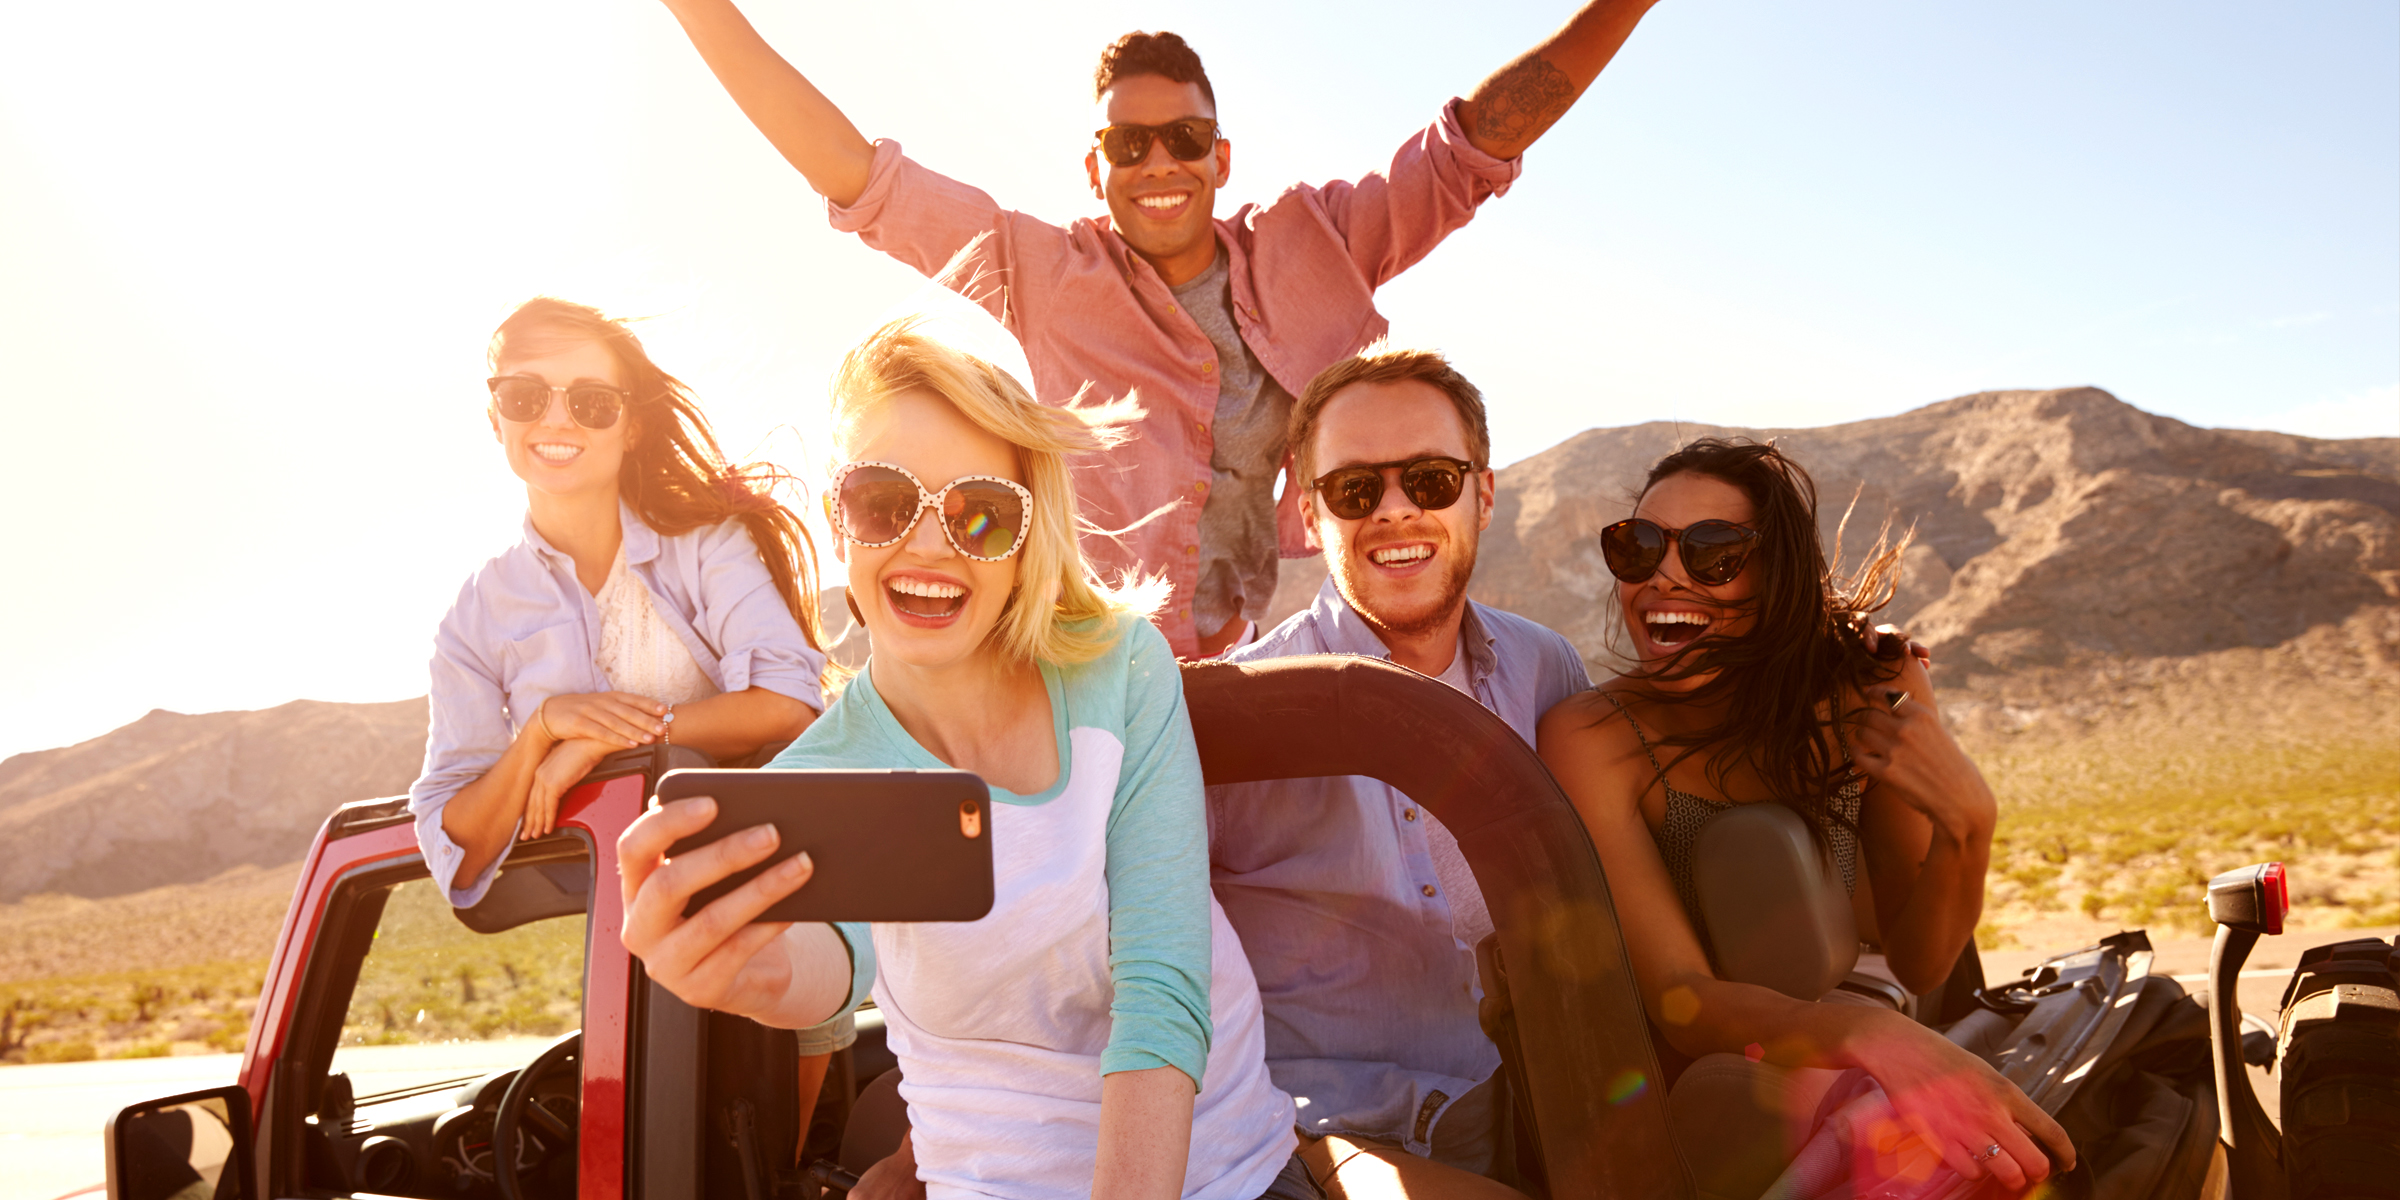 A group of friends taking a selfie while on a road trip | Source: Shutterstock